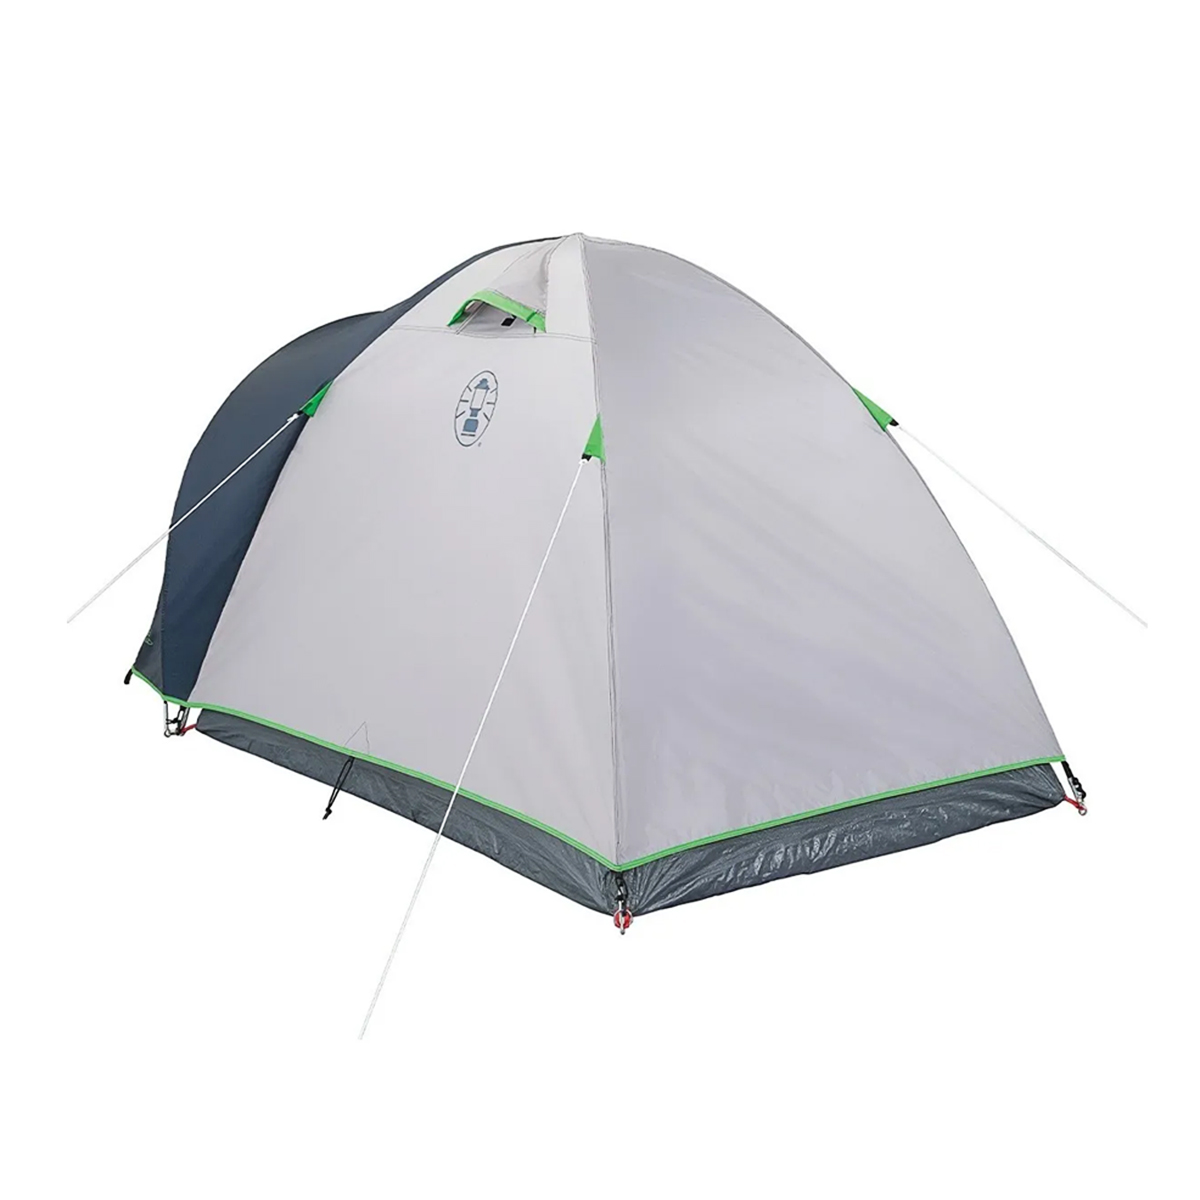 Carpa Coleman Xt 2 personas,  image number null